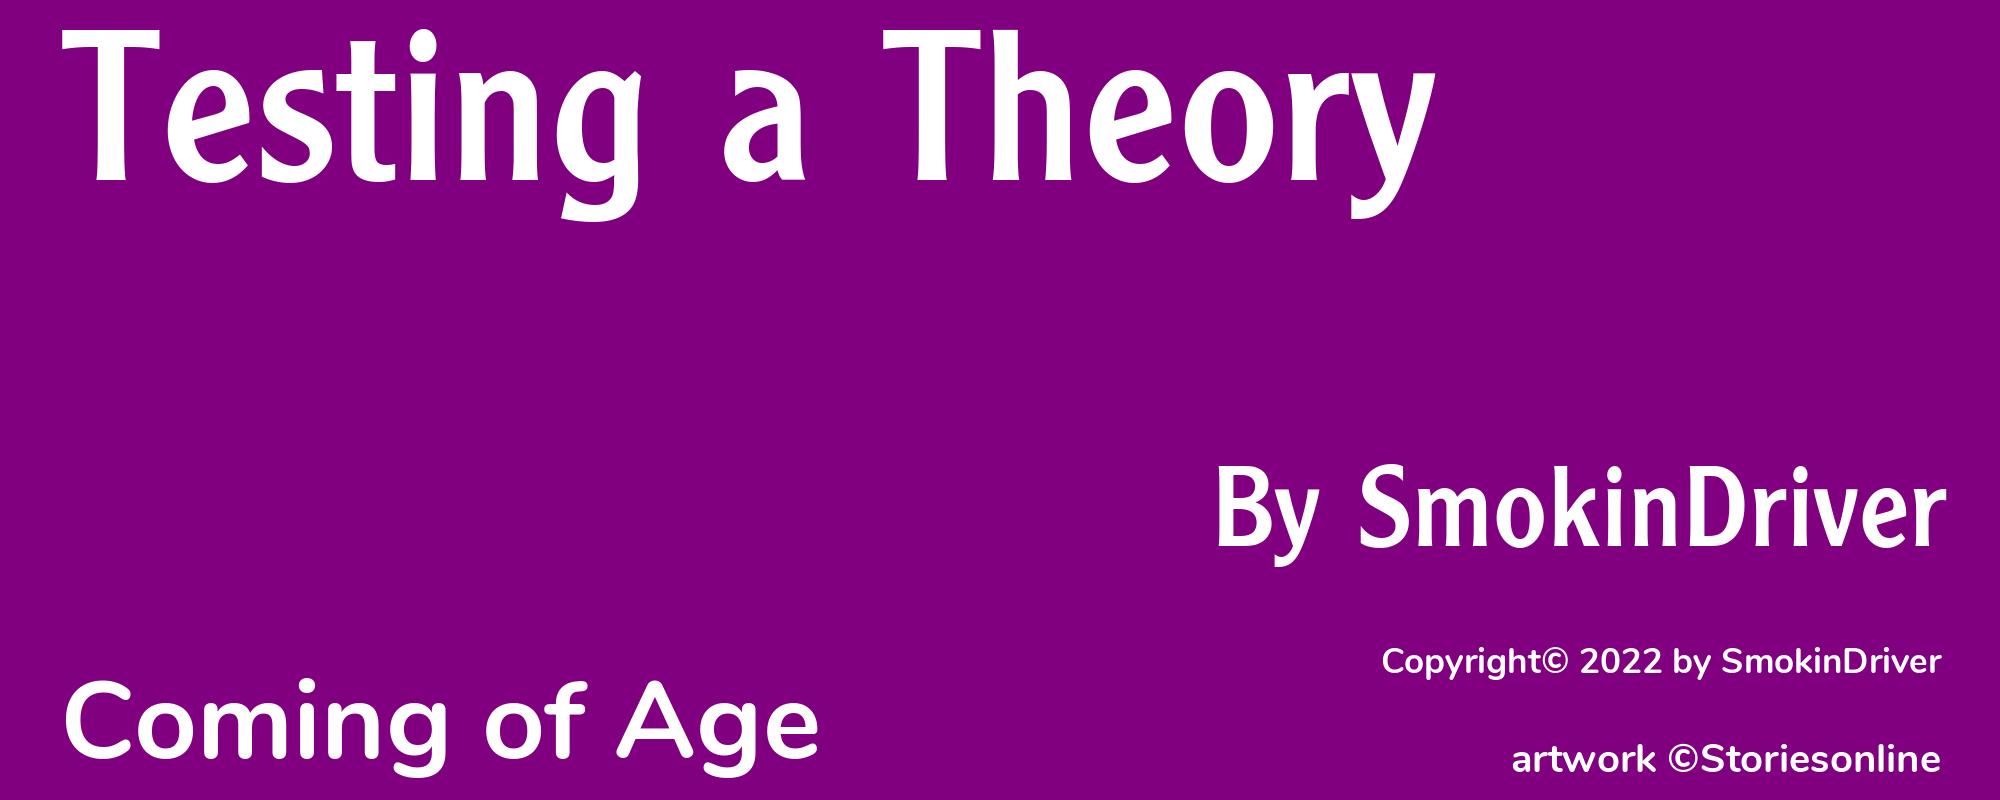 Testing a Theory - Cover